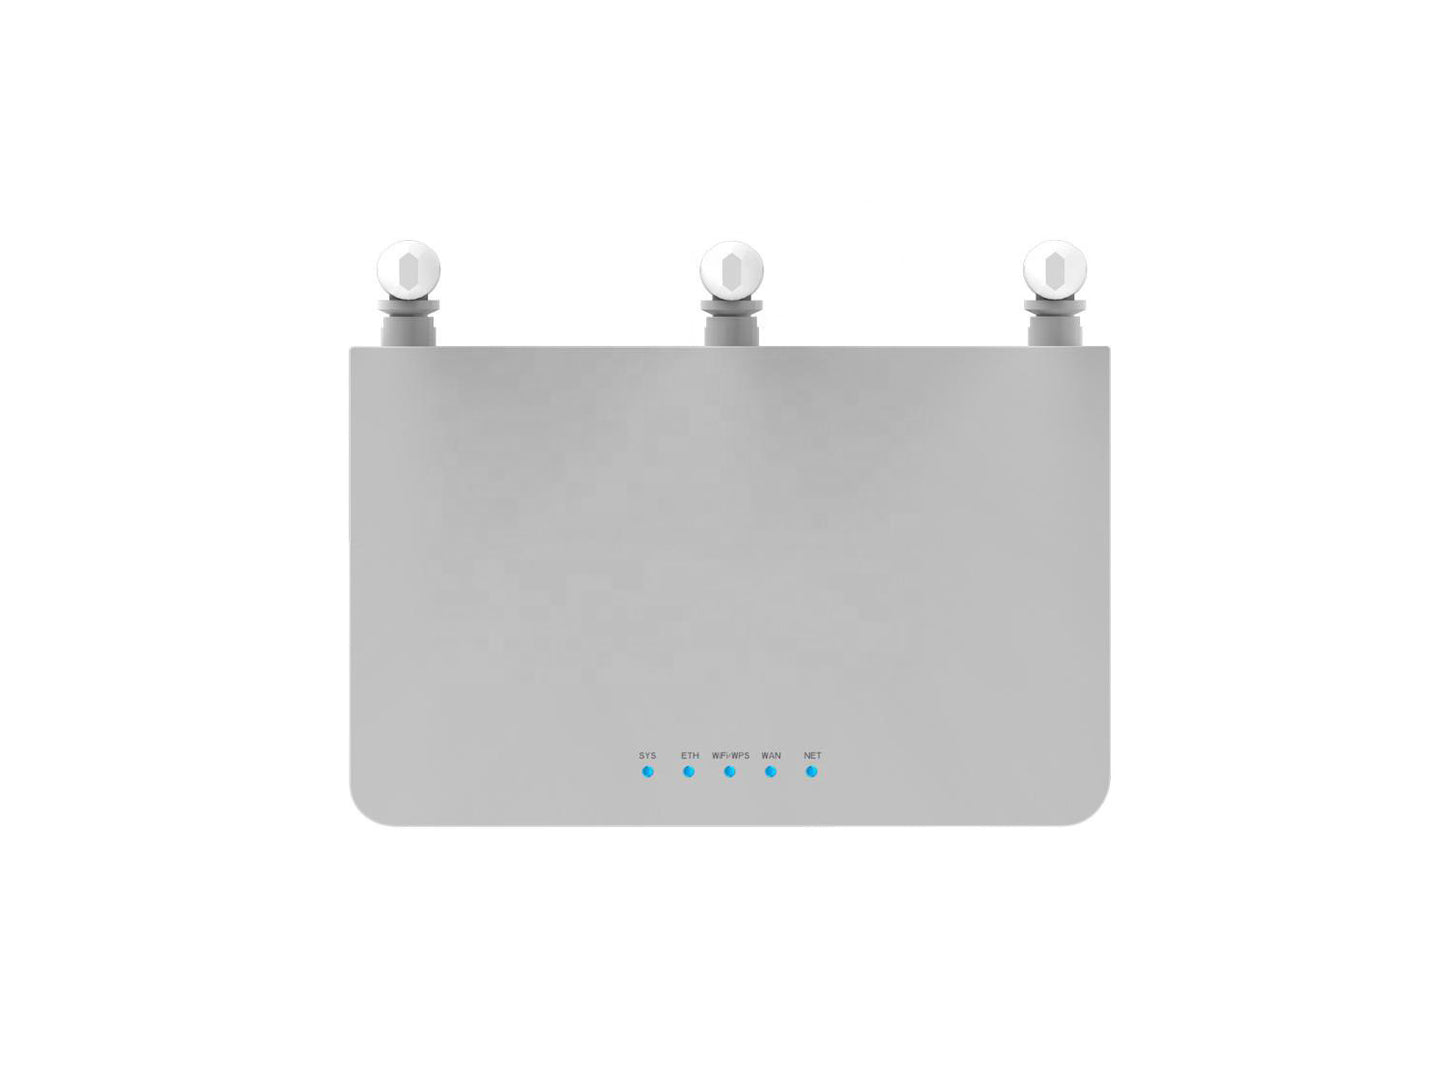 BDI 4G LTE Wireless Router with VoIP/VoLTE/CS